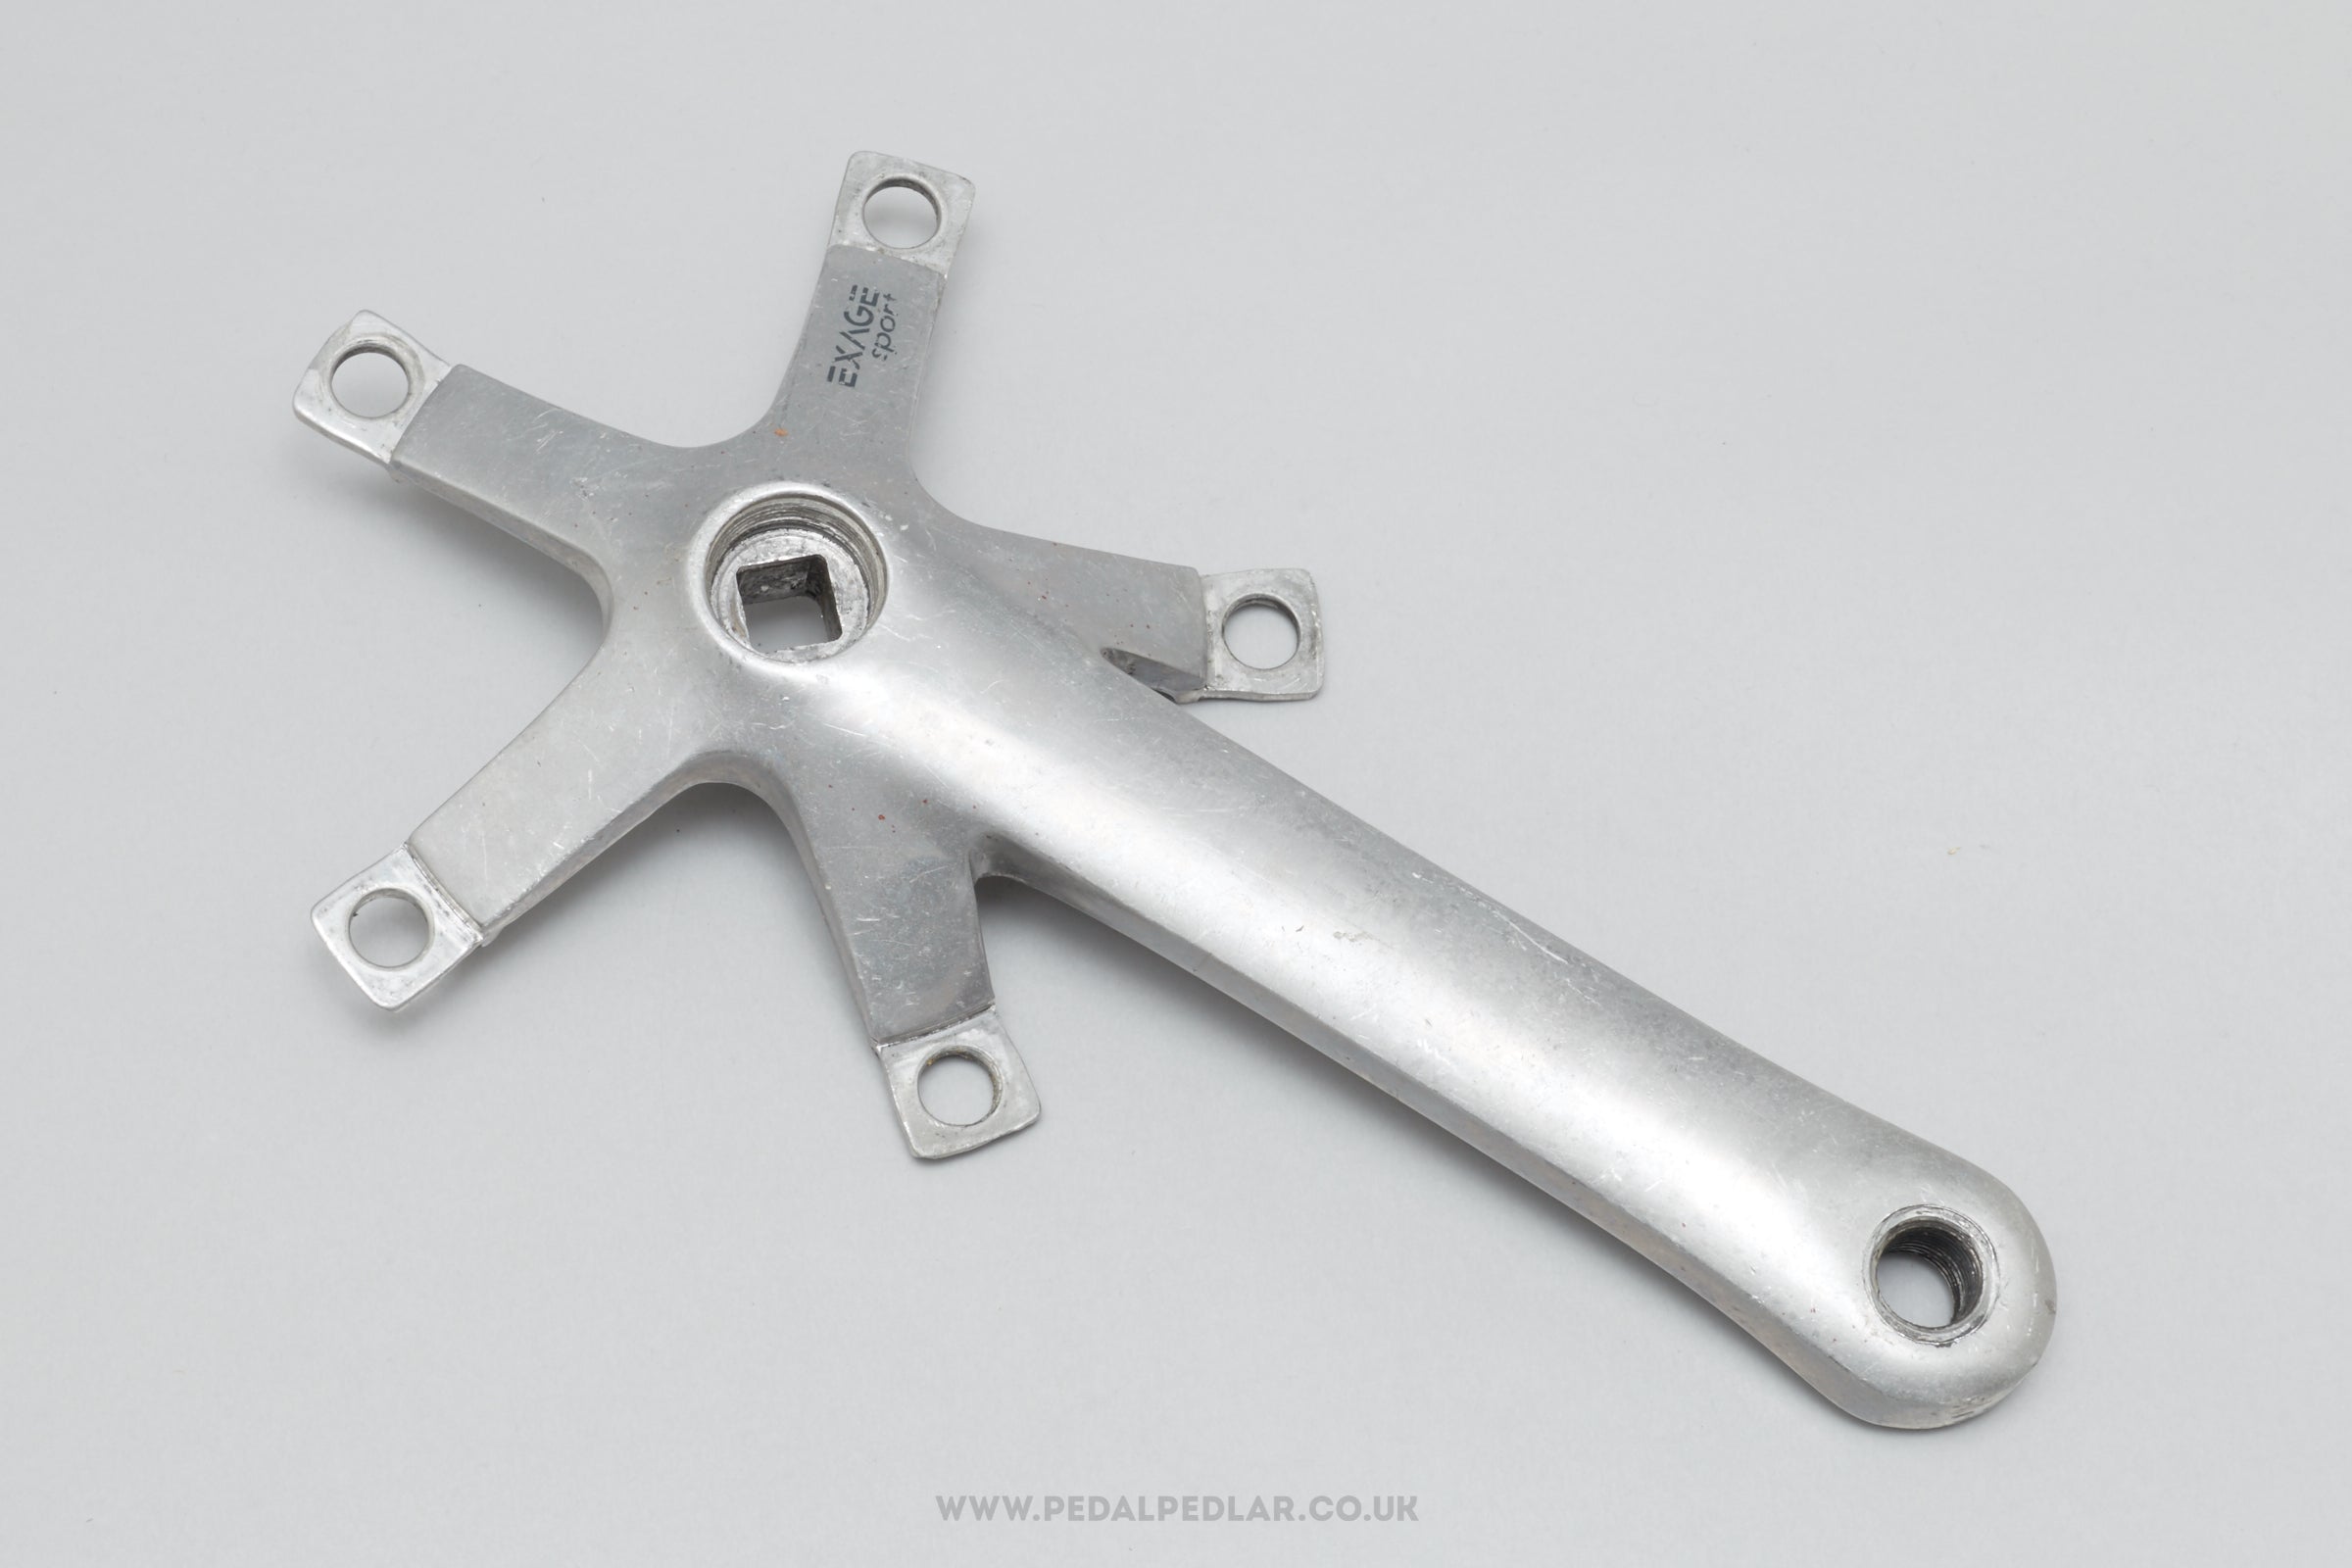 Shimano Exage Sport (FC-A450) c.1988 Vintage 130 BCD 170 mm Right Crank Arm / Spider - Pedal Pedlar - Bike Parts For Sale